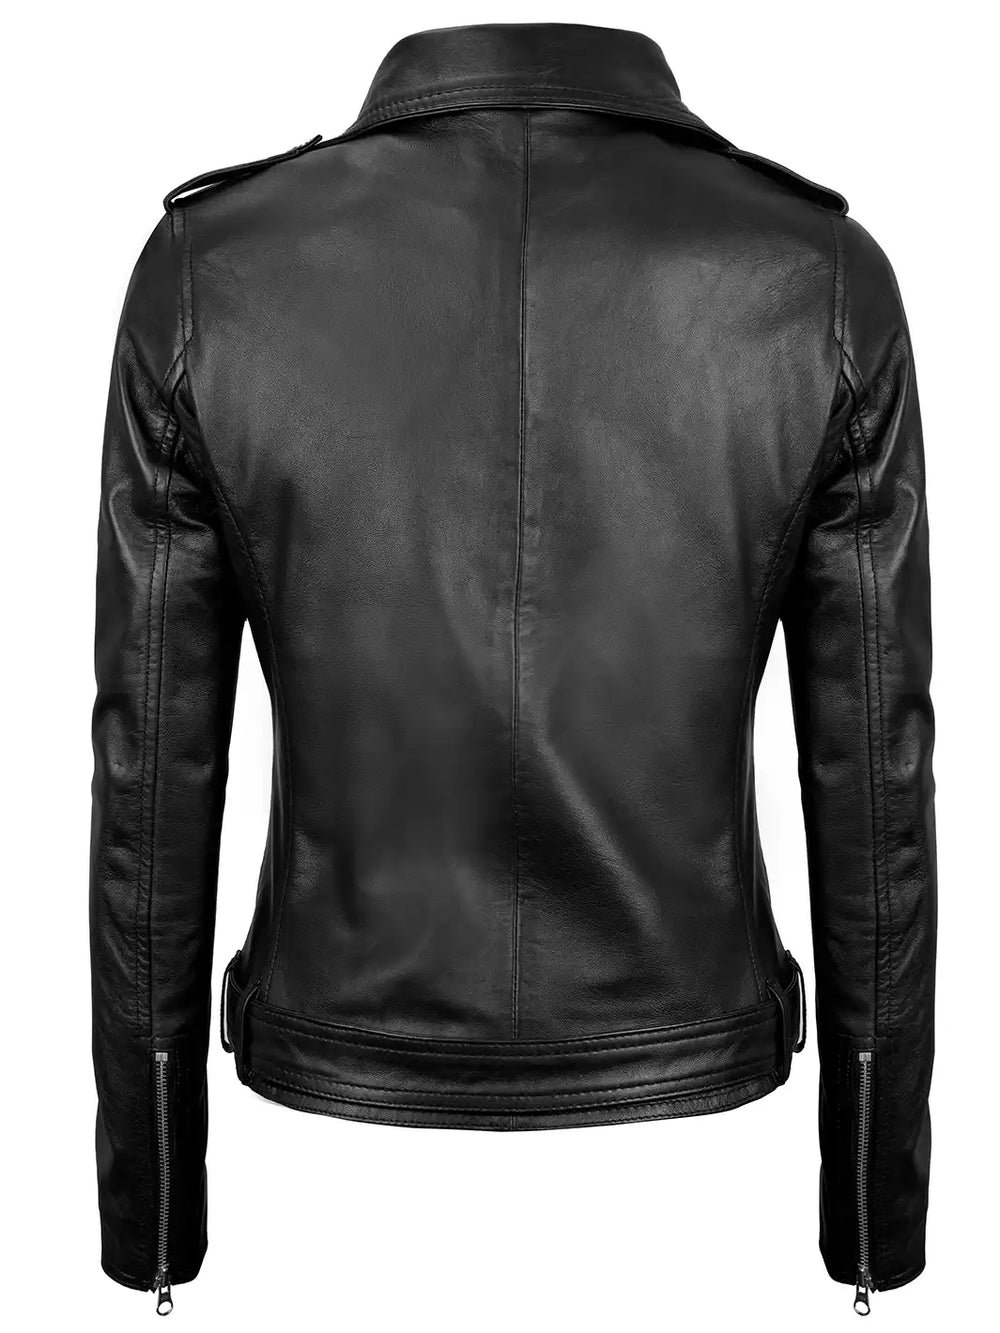 Womens motorcycle leather jacket